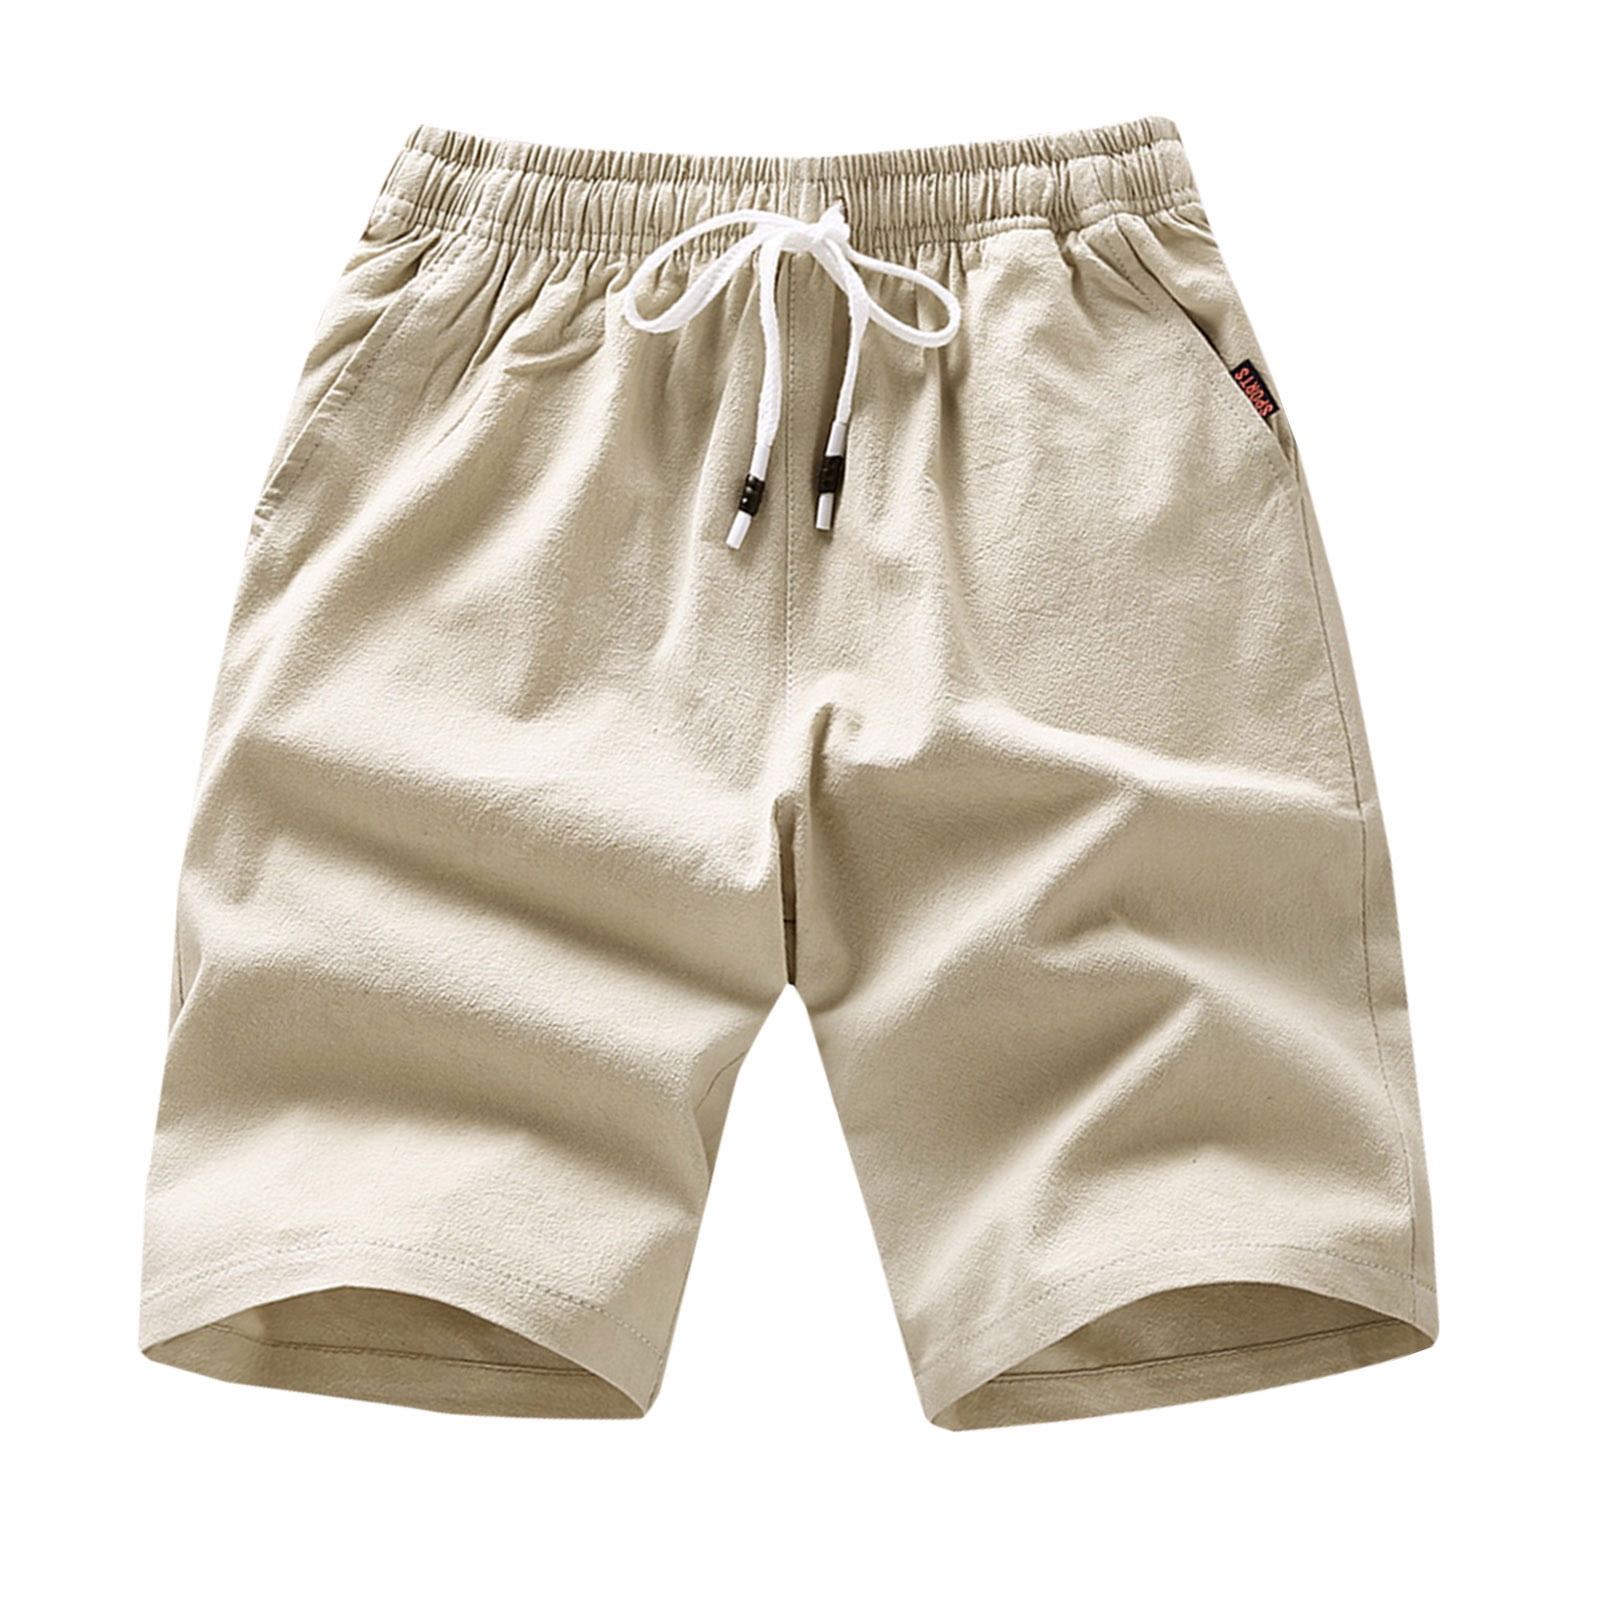 Jophufed Men's Pants Short Pants Made Of Pure Cotton Fabric Are